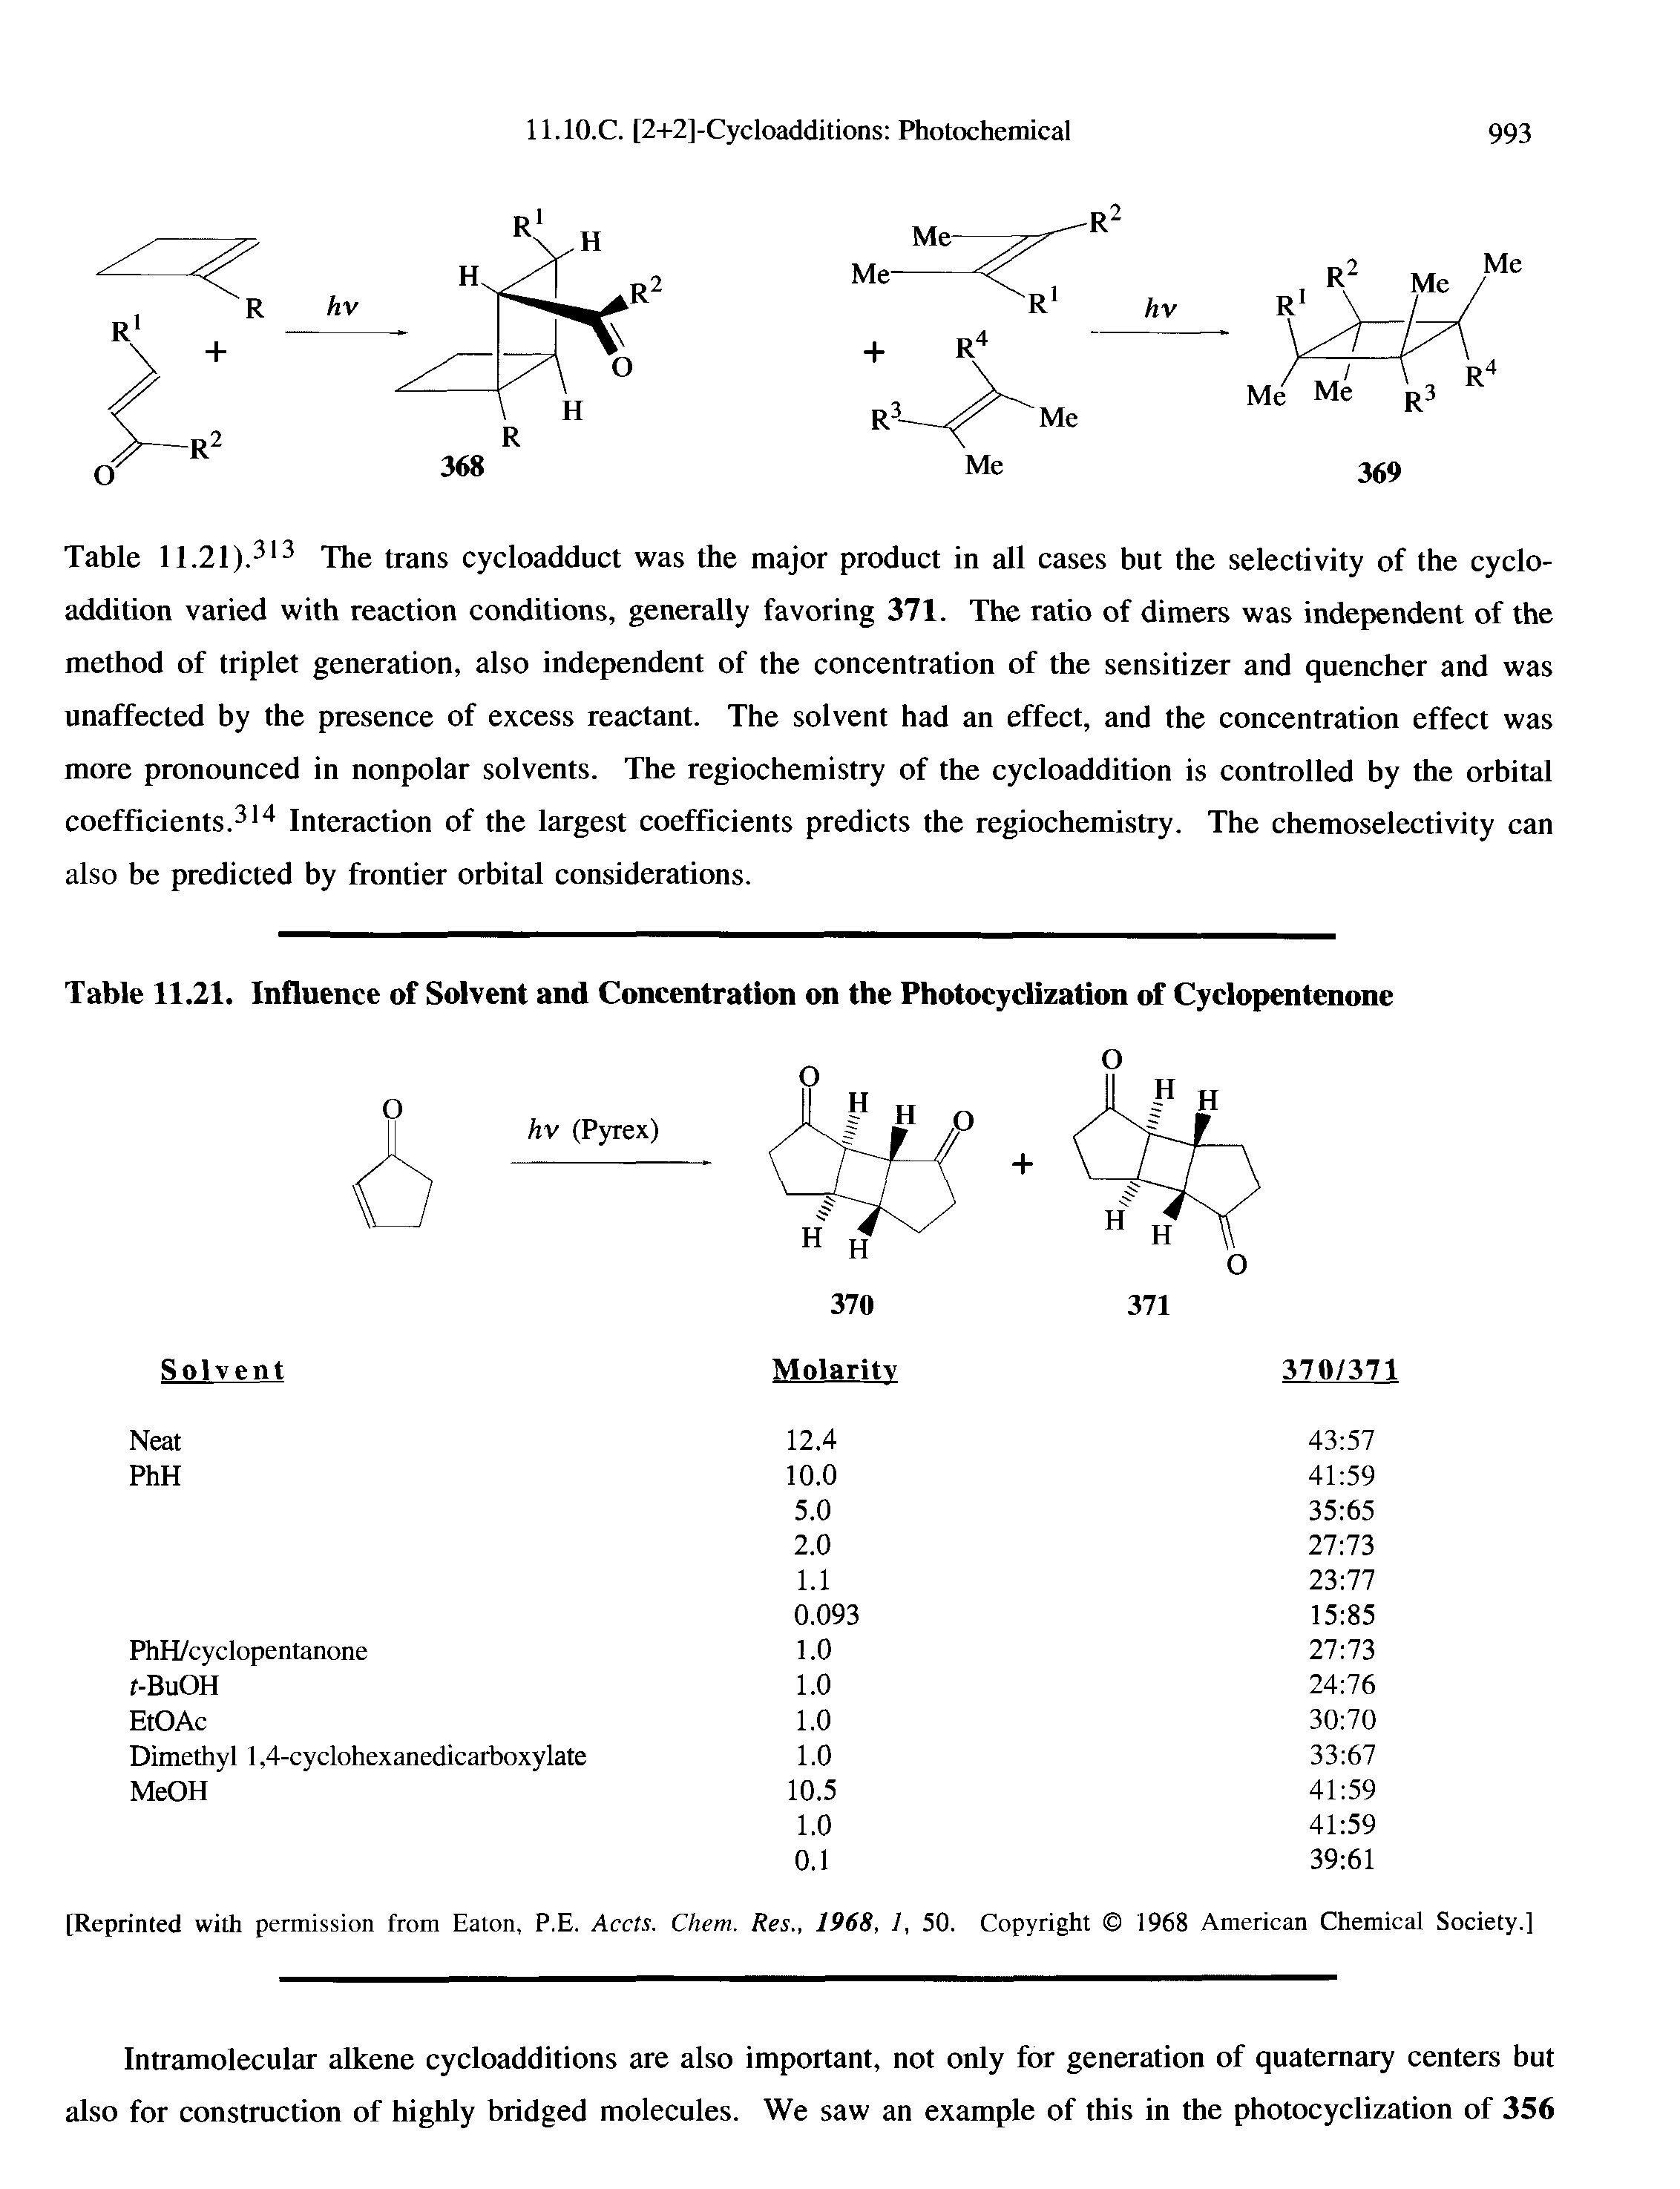 Table 11.21).3 3 The trans cycloadduet was the major produet in all eases but the selectivity of the cycloaddition varied with reaction conditions, generally favoring 371. The ratio of dimers was independent of the method of triplet generation, also independent of the concentration of the sensitizer and quencher and was unaffected by tbe presence of excess reactant. Tbe solvent bad an effect, and tbe concentration effect was more pronounced in nonpolar solvents. Tbe regiocbemistry of tbe cycloaddition is controlled by tbe orbital coefficients. Interaction of tbe largest coefficients predicts tbe regiocbemistry. Tbe cbemoselectivity can also be predicted by frontier orbital considerations.